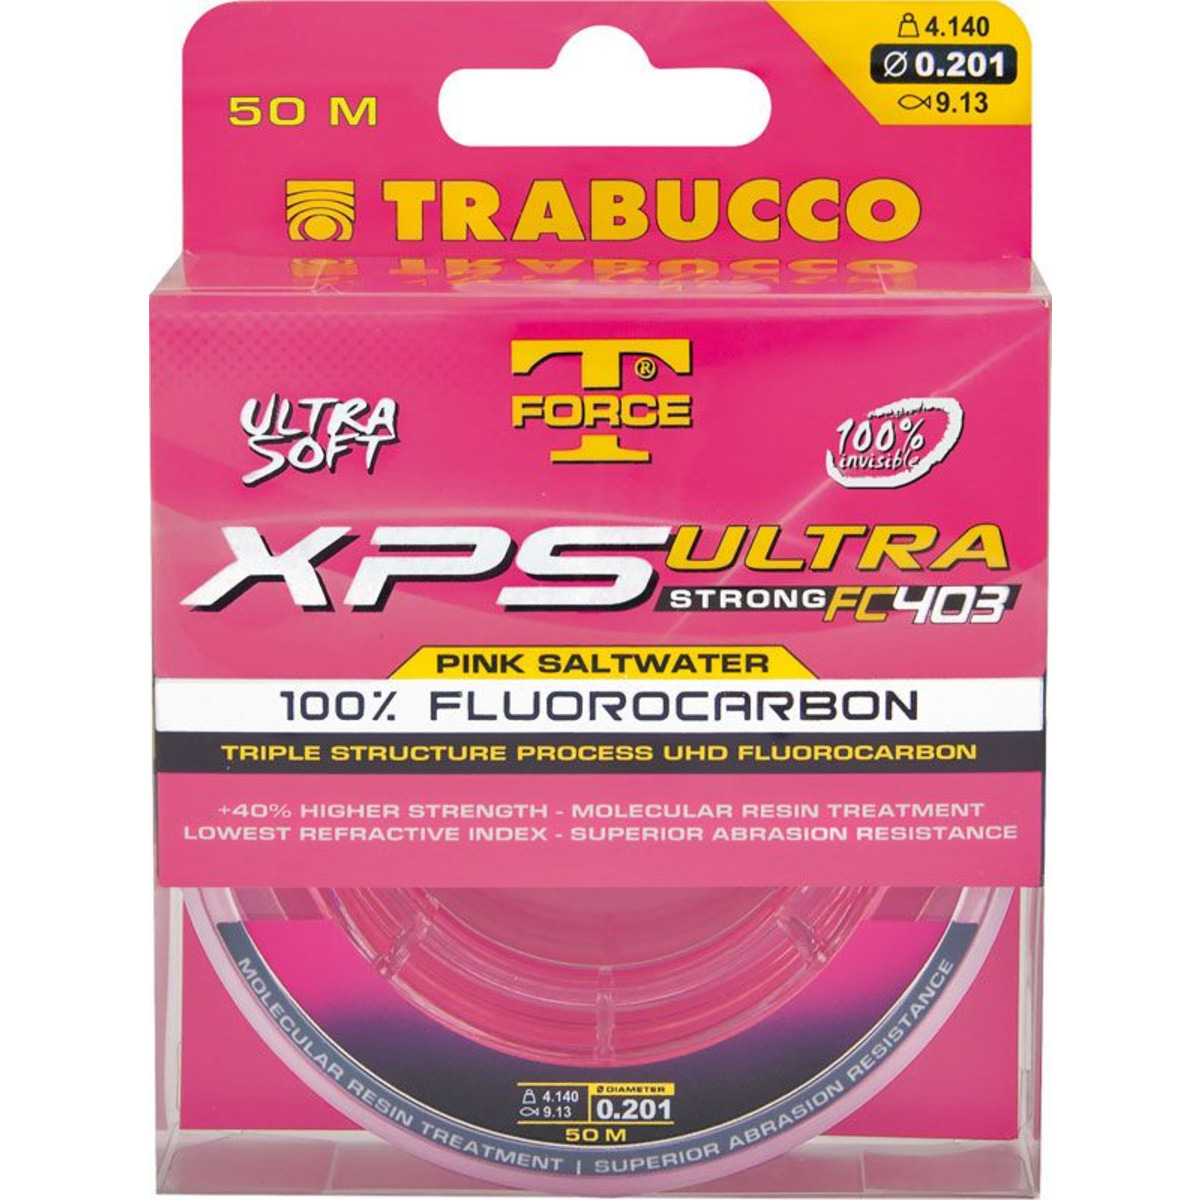 Trabucco XPS Ultra Strong Pink Saltwater - 50 m - 0.221 mm